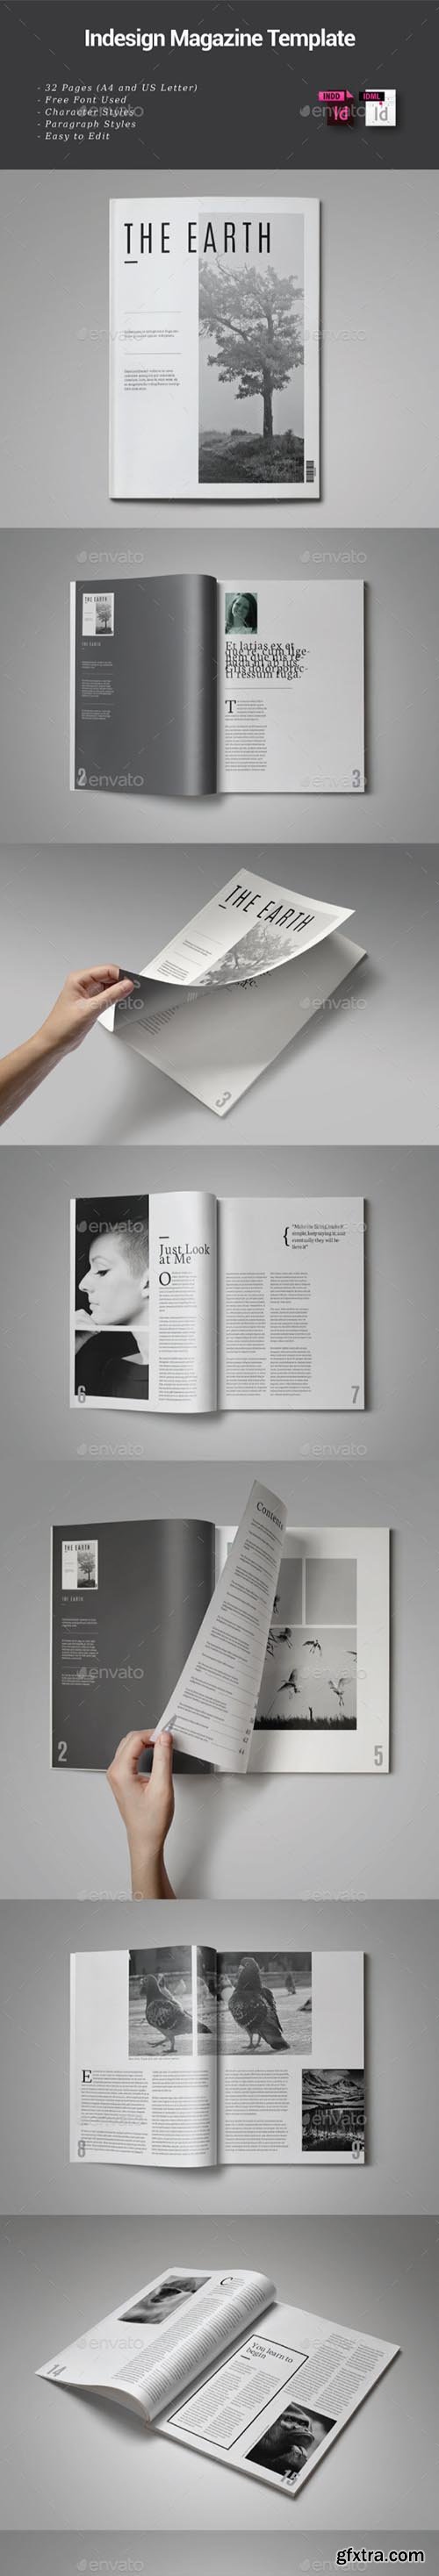 32 Pages Indesign Magazine Template 9112619